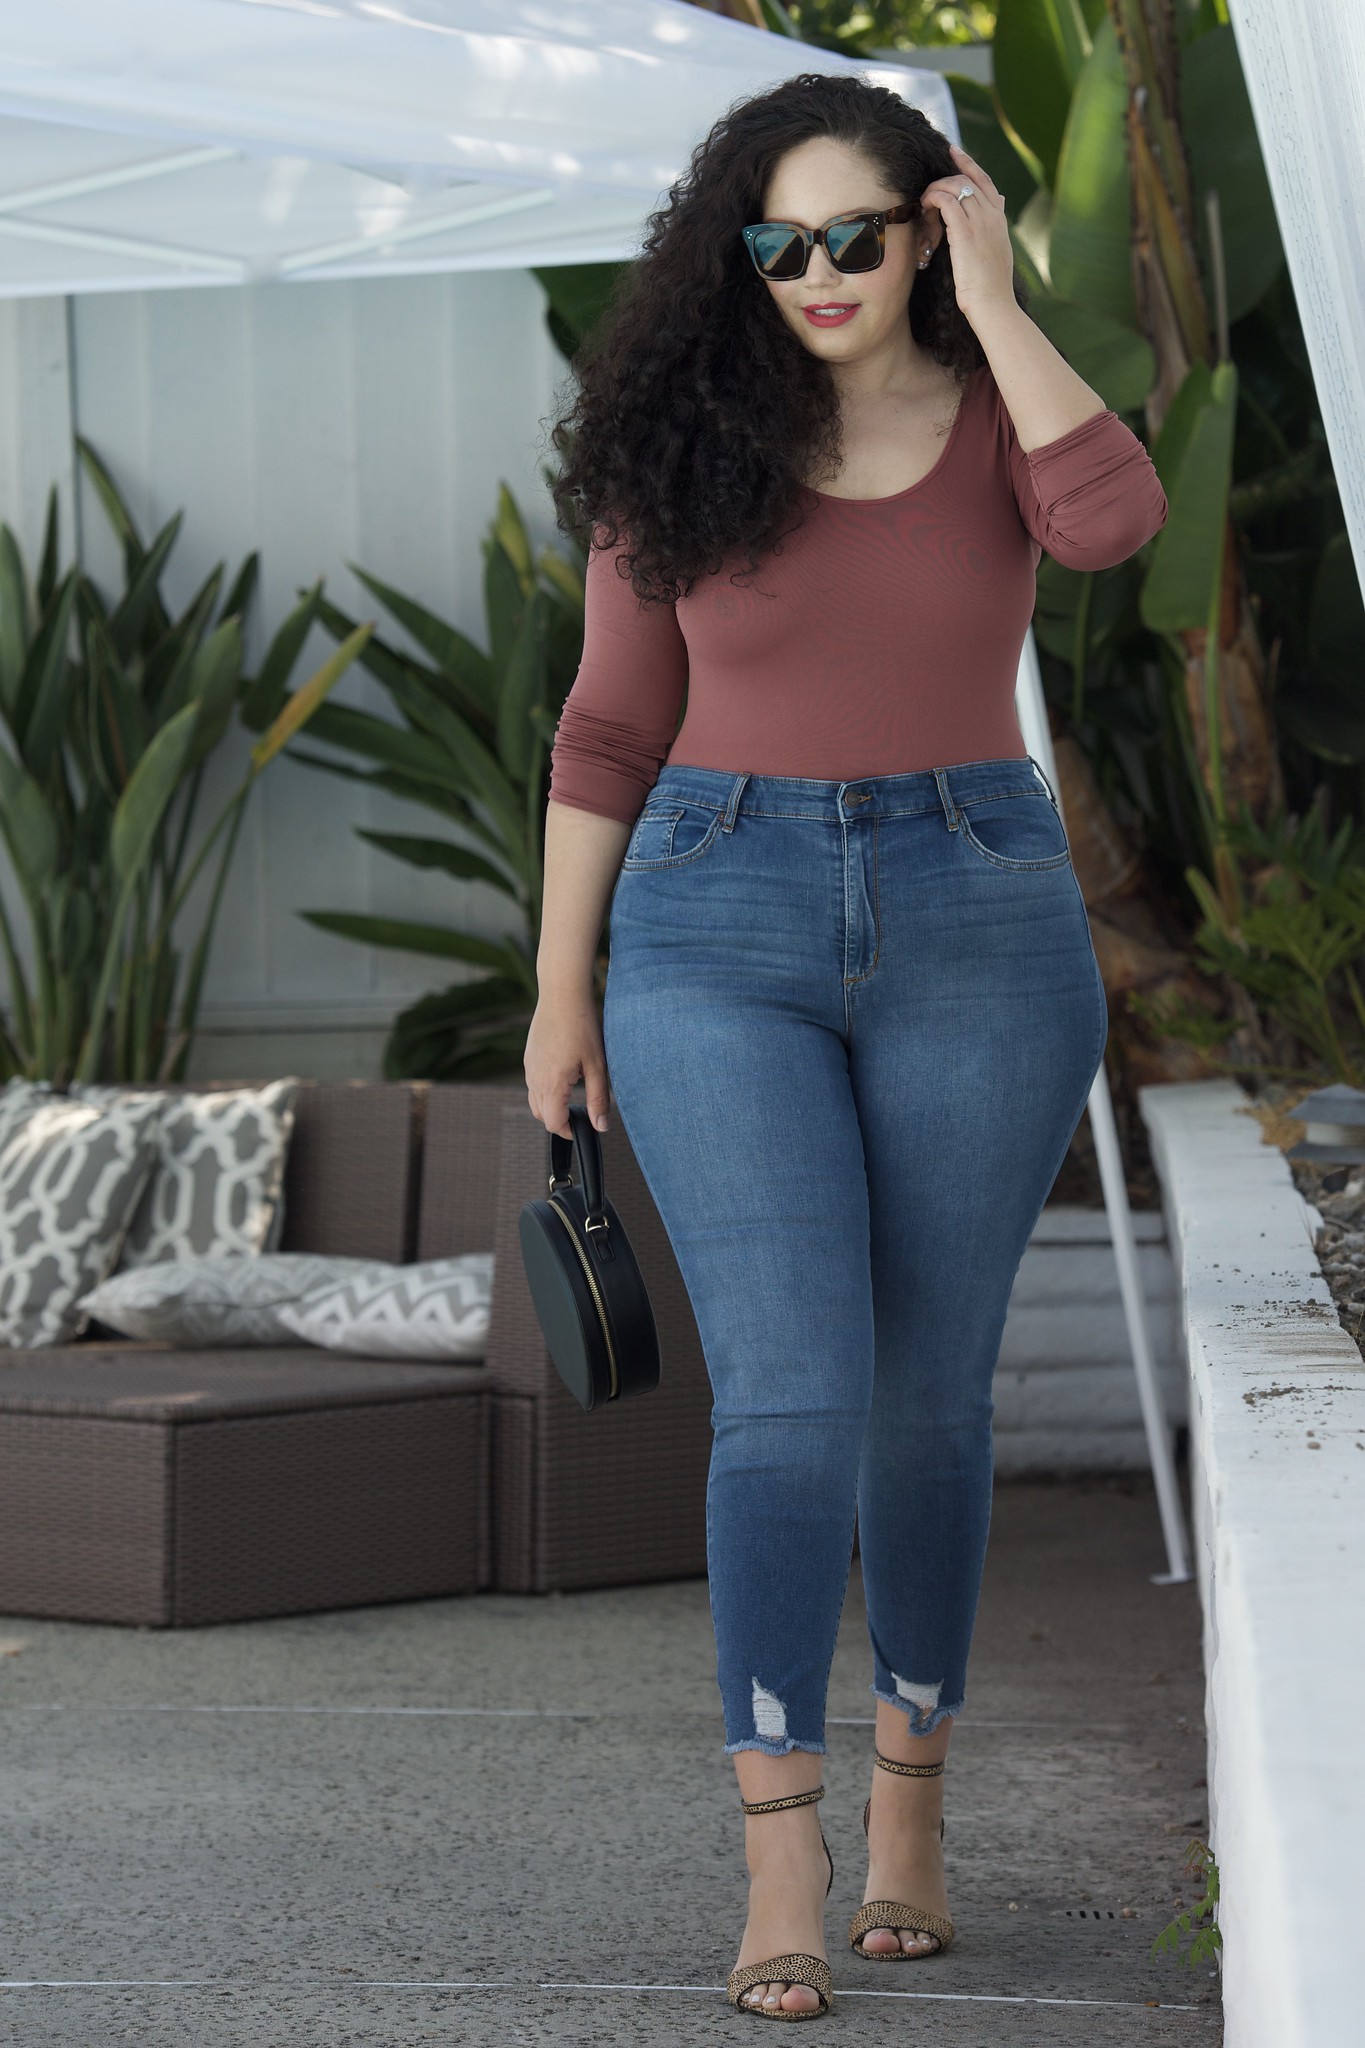 These are the Best Curvy Fit Jeans under $25 | Girl With Curves